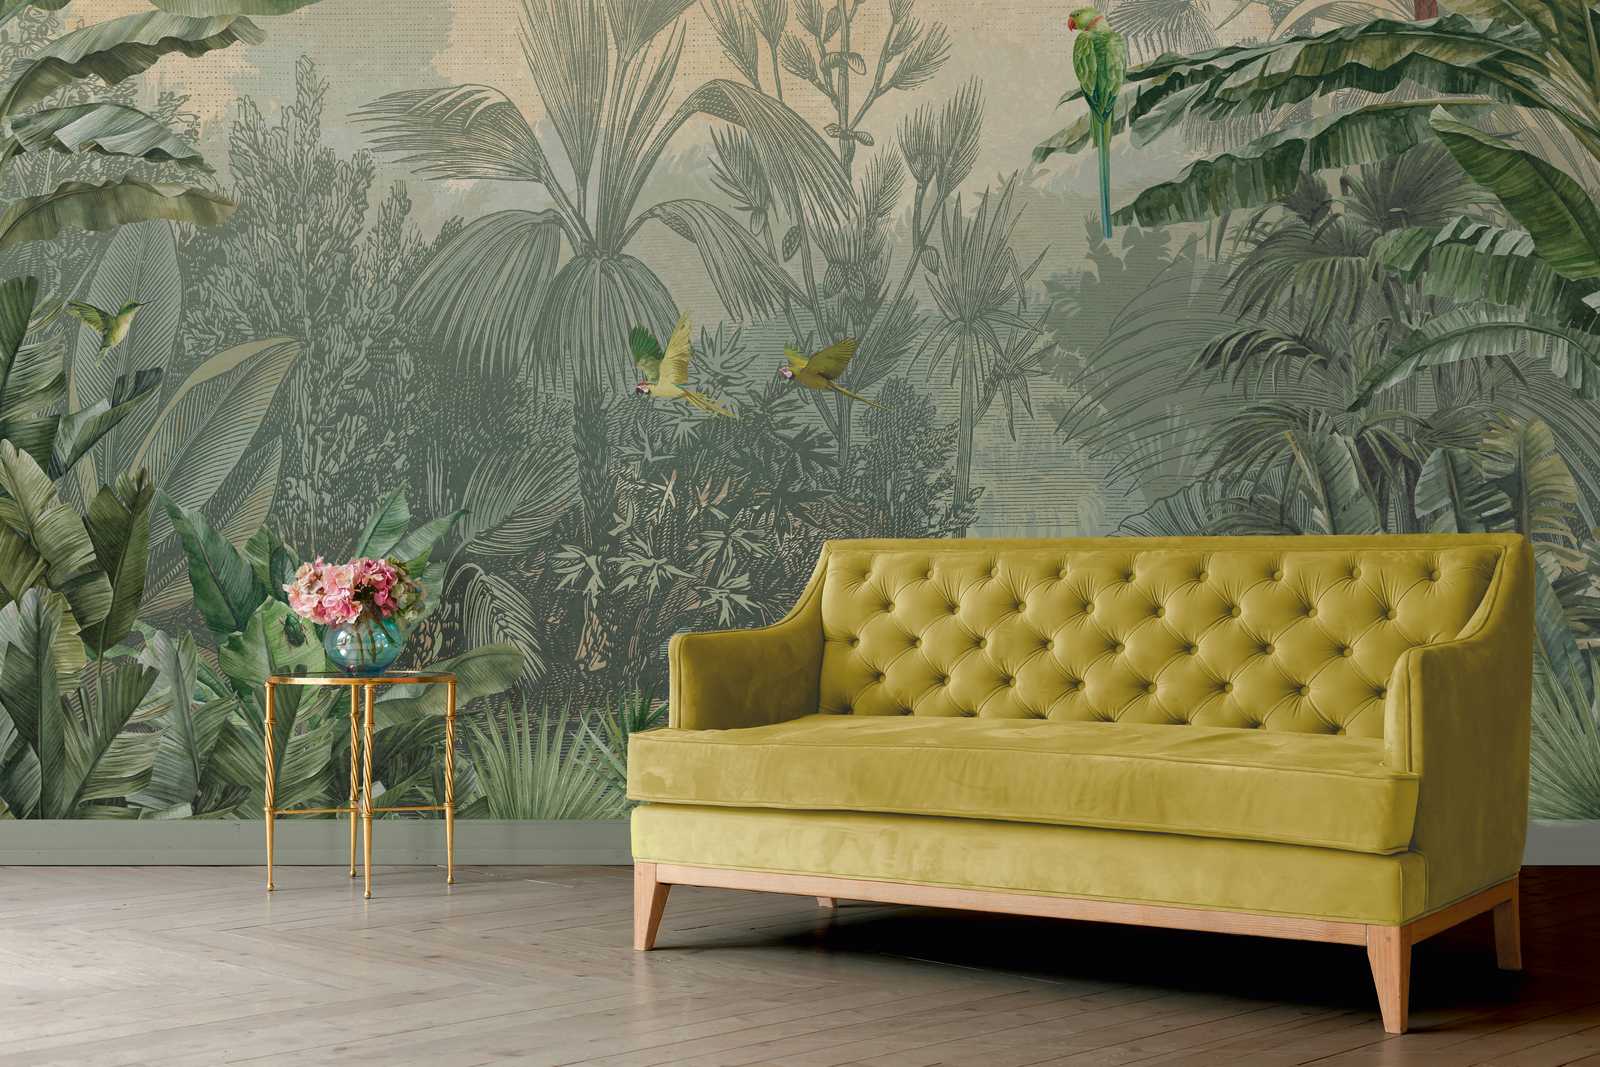             Green mural jungle palm trees & parrots in drawing style
        